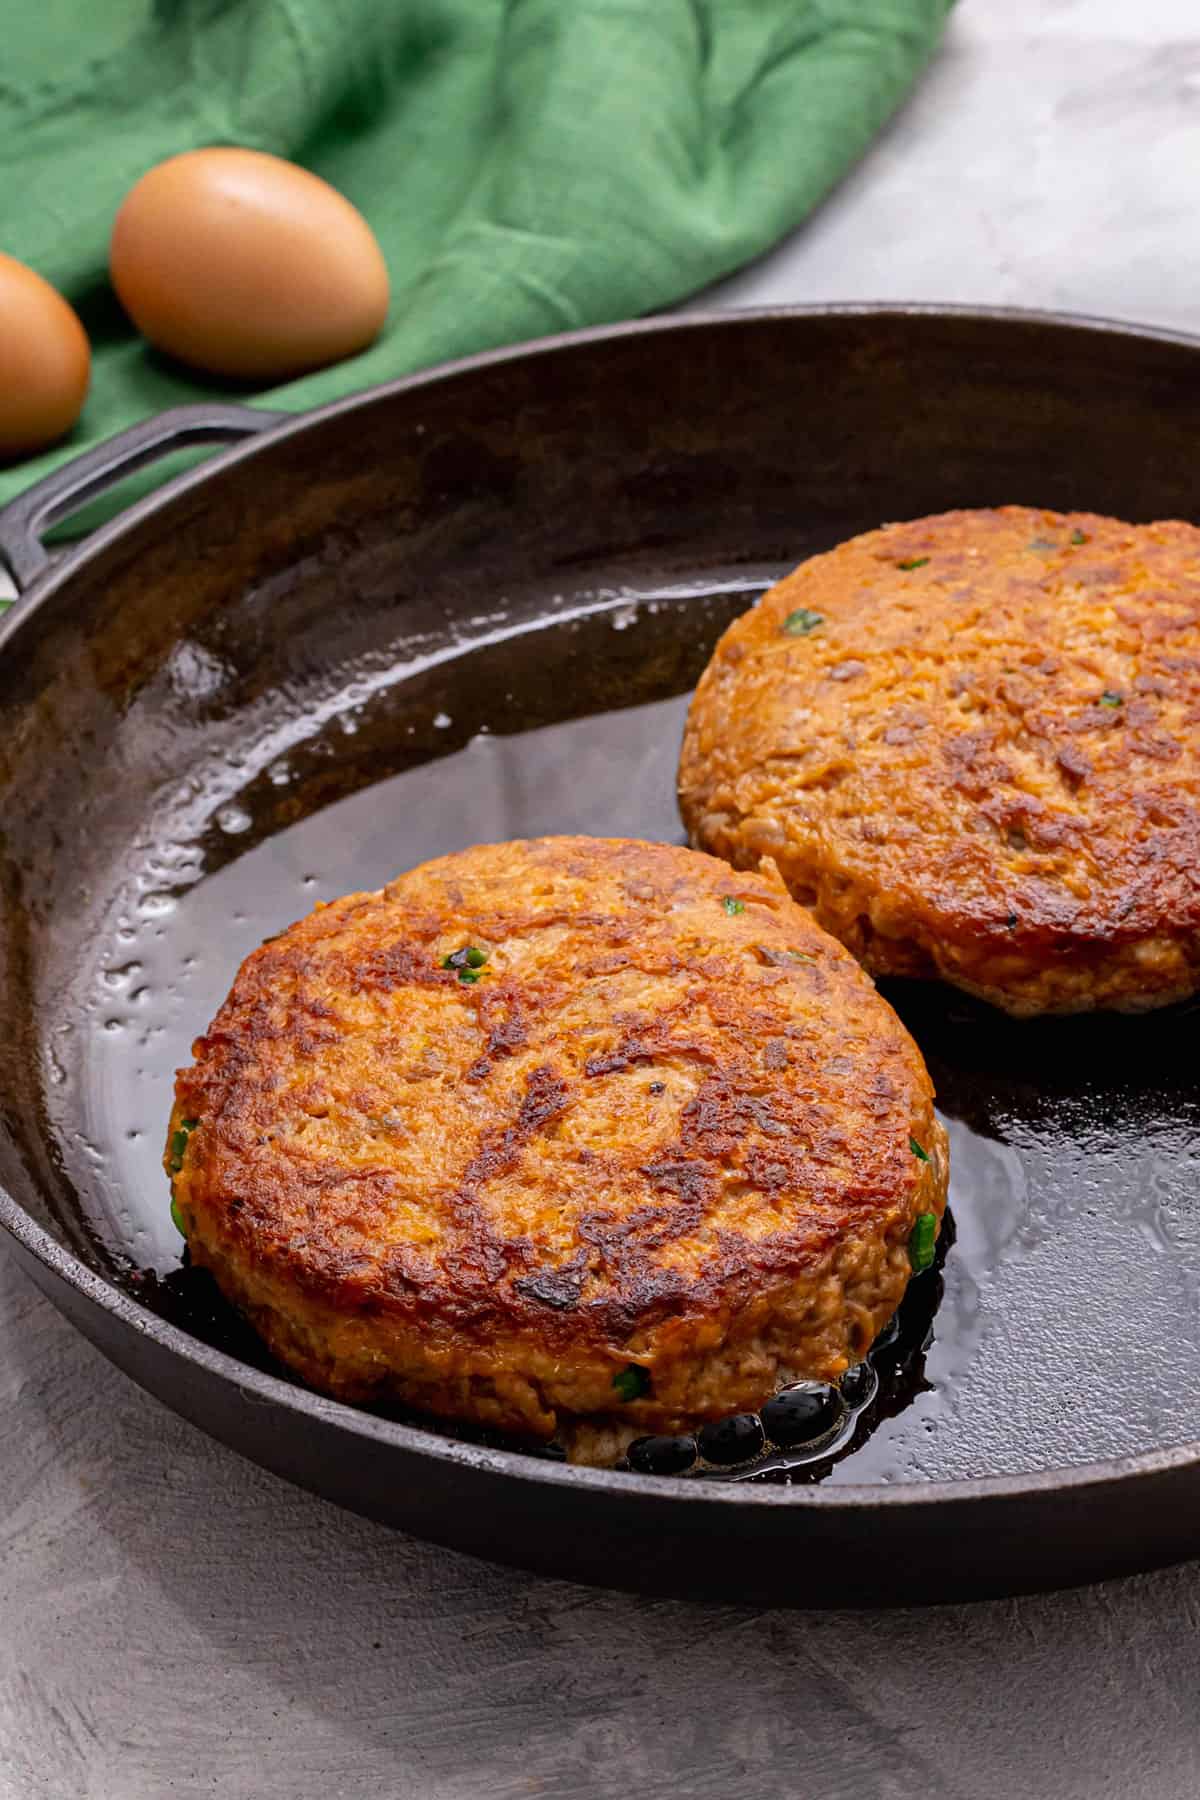 Salmon burgers being cooked in a pan.